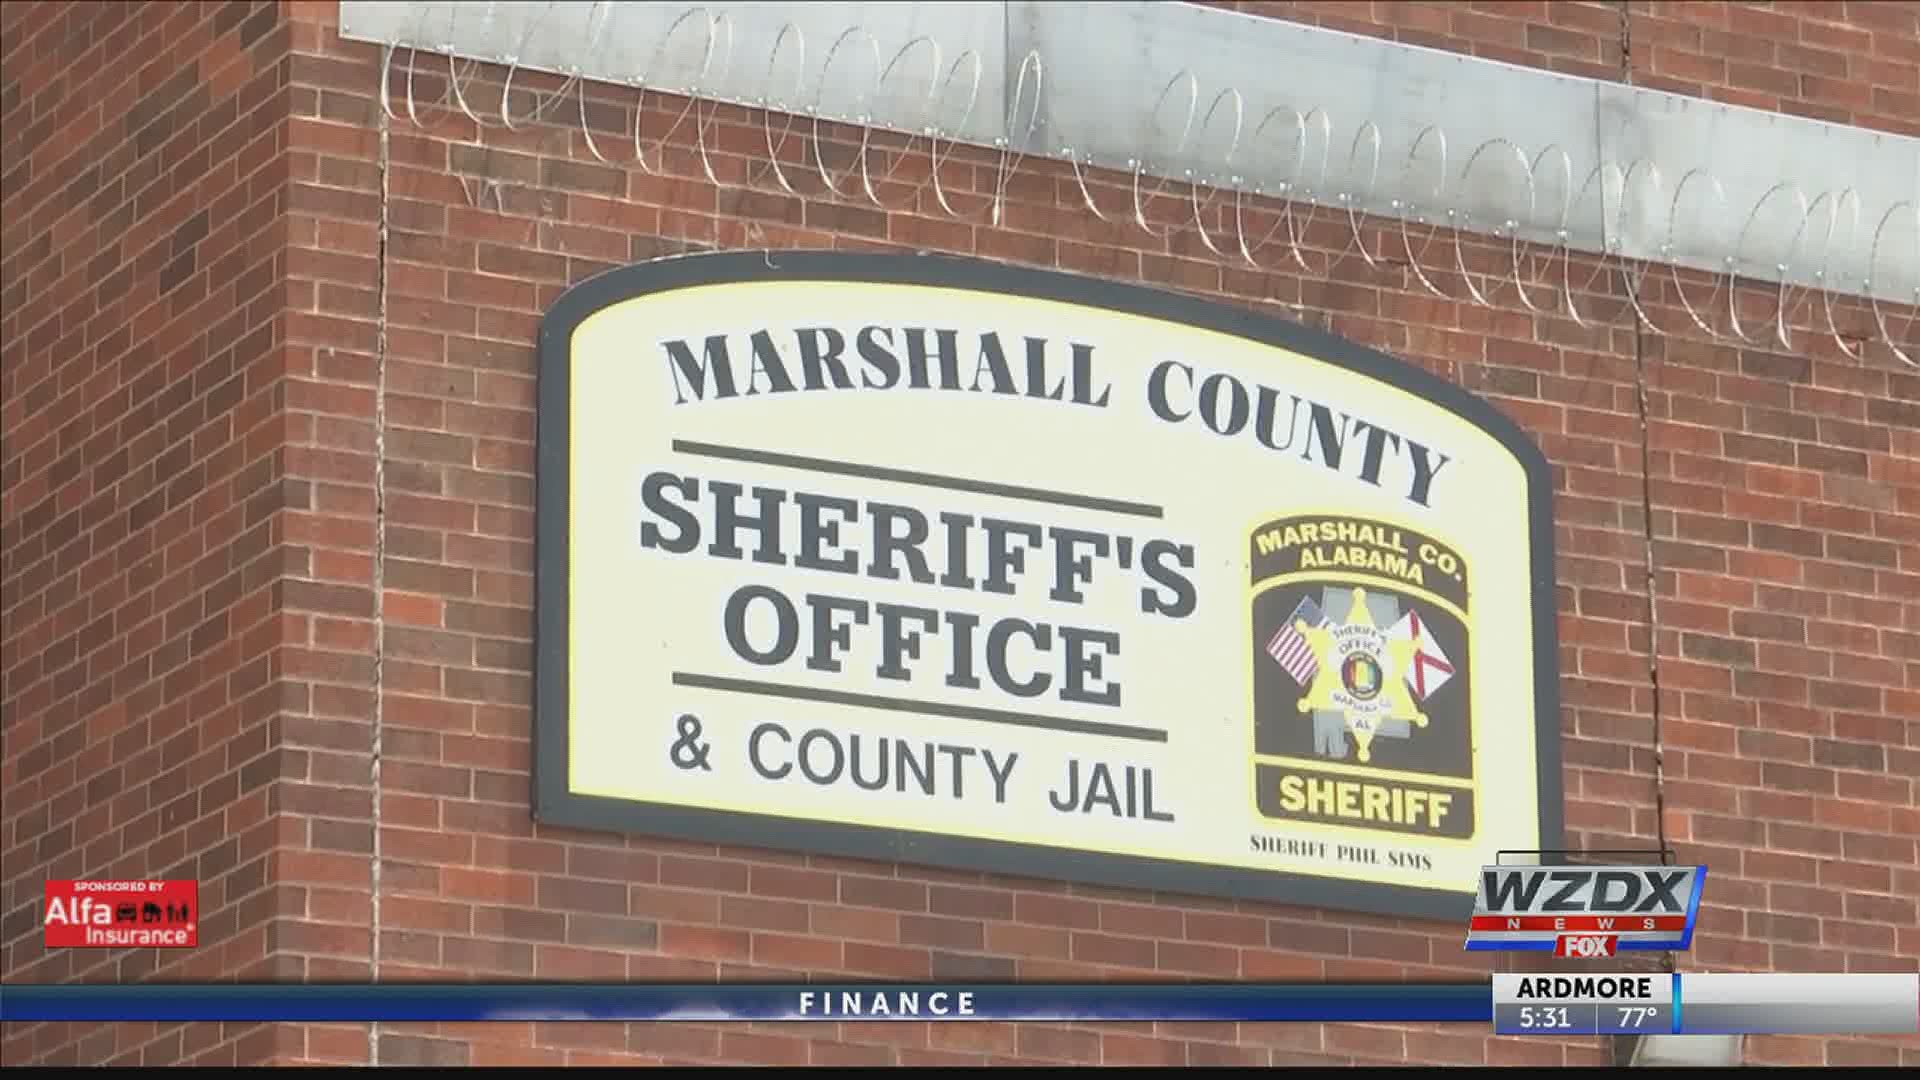 The Marshall County Sheriff's Office is embracing social media, and using it as a crime fighting tool.